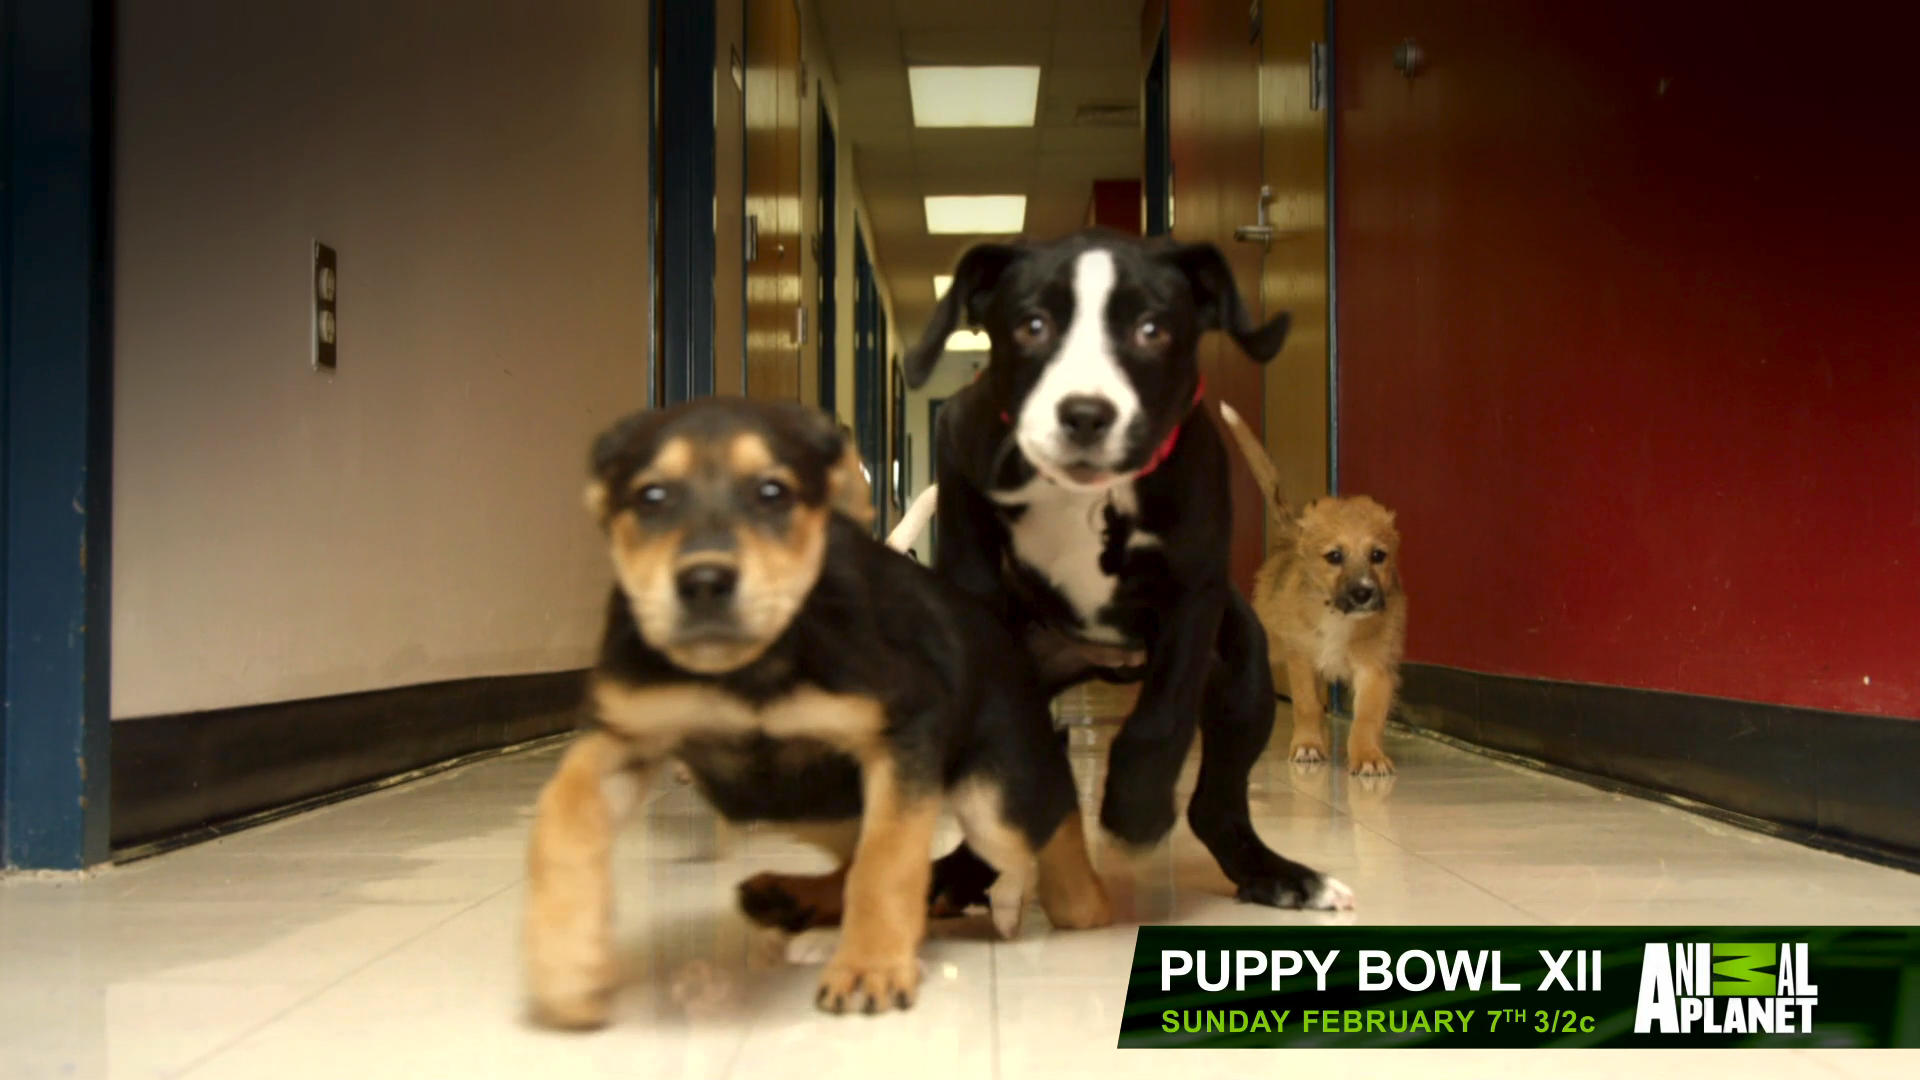 Puppy Bowl XII Is Coming! Feb. 7 at 3/2c